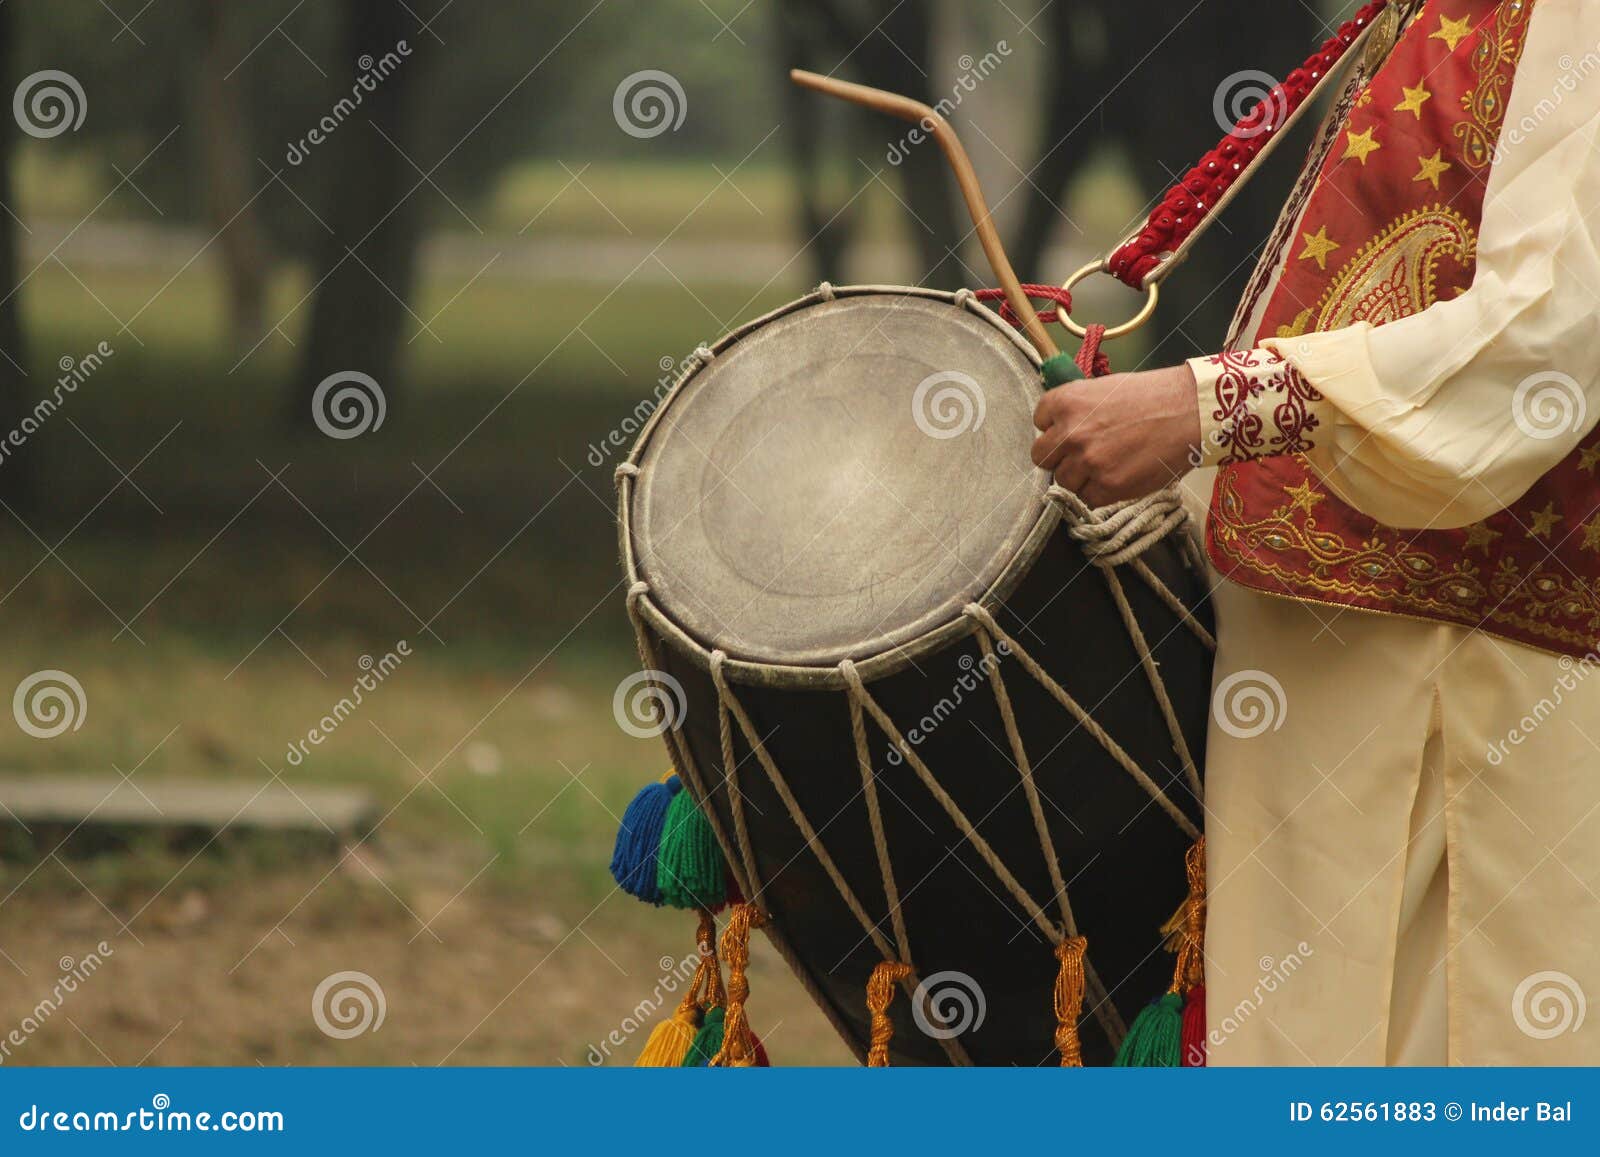 Xxx Video Garhwali Dhol - Dhol of indian culture. stock image. Image of music, garden - 62561883